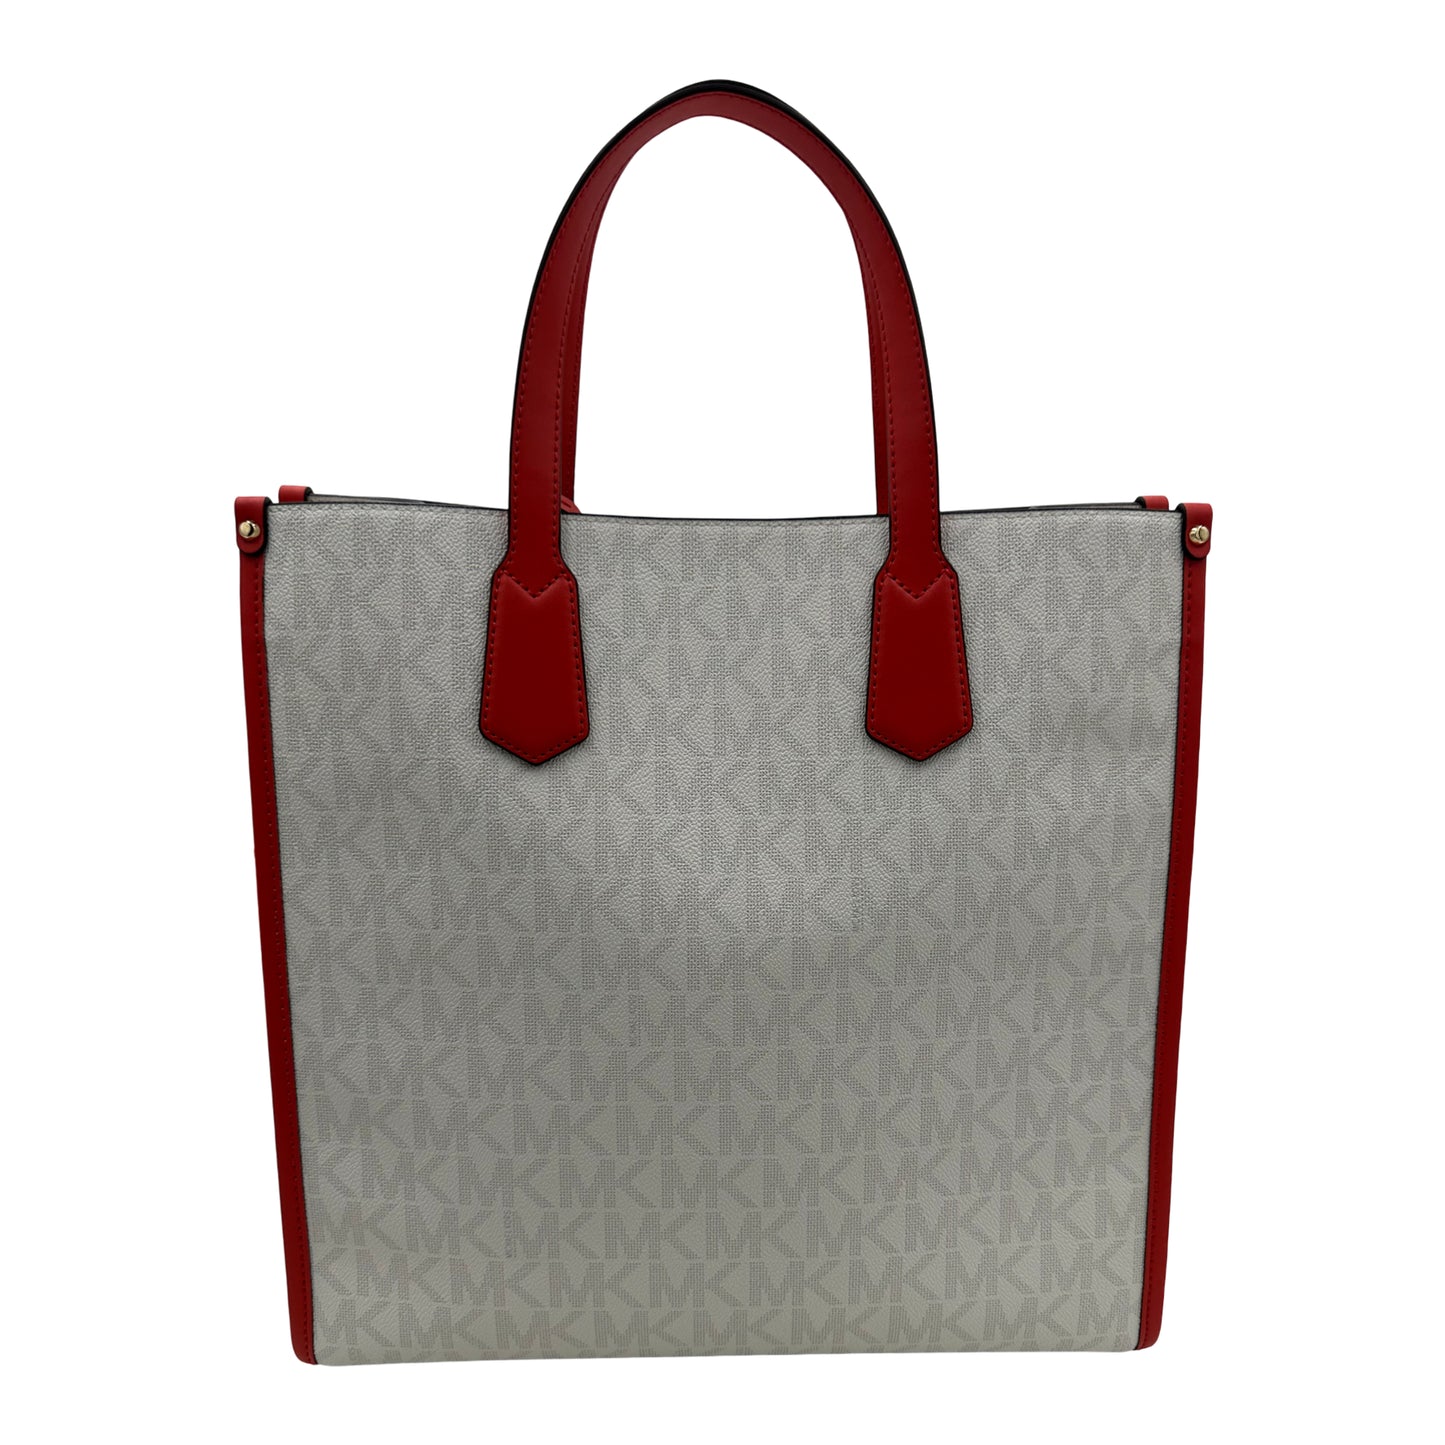 Michael Kors Maple Large Logo Tote - Spiced Coral